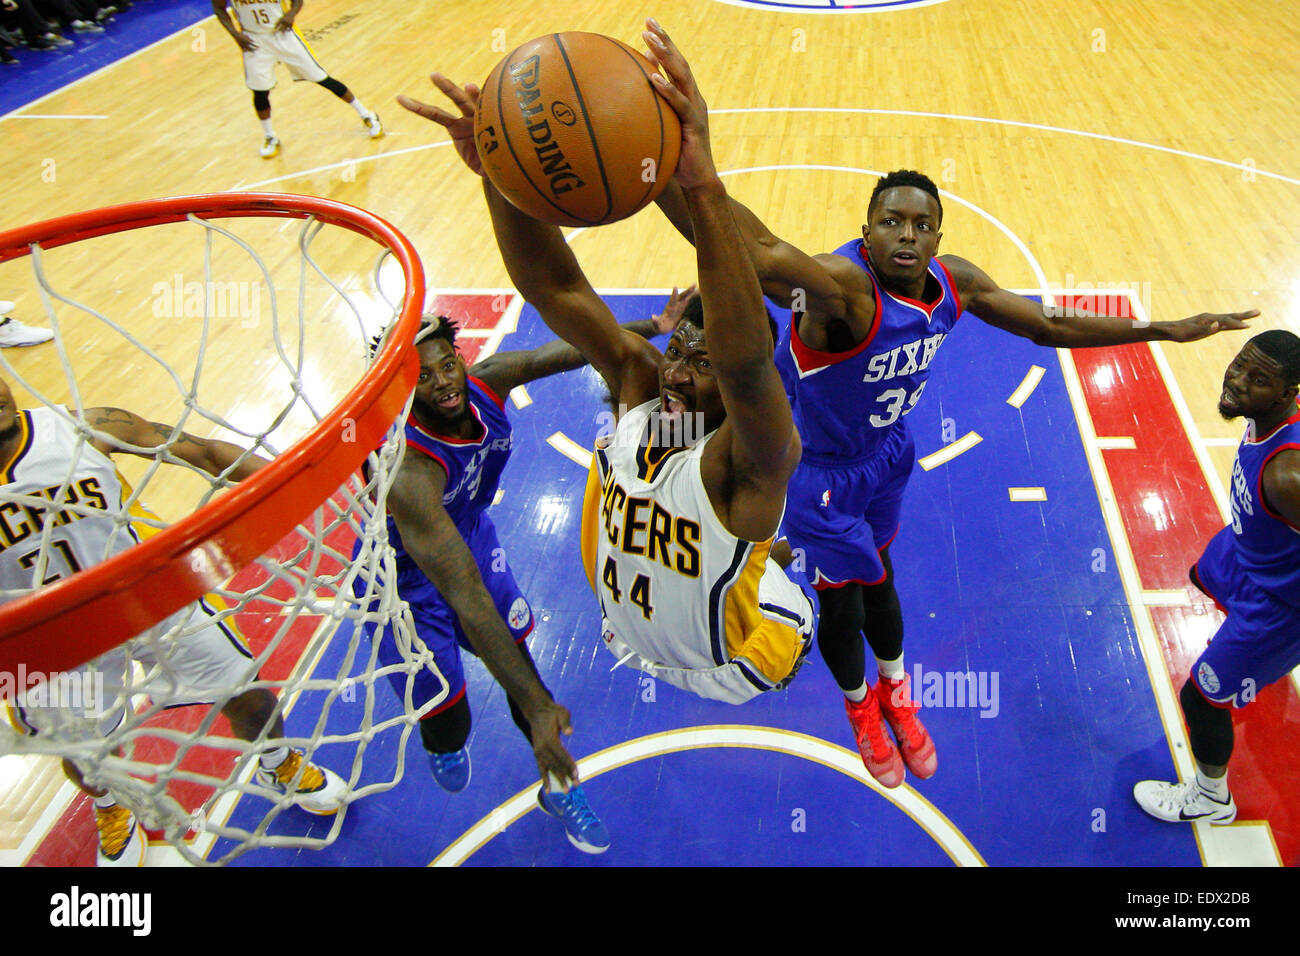 January 10, 2015: Indiana Pacers forward Solomon Hill (44) goes up for the shot as Philadelphia 76ers forward Jerami Grant (39) comes up from behind to block it during the NBA game between the Indiana Pacers and the Philadelphia 76ers at the Wells Fargo Center in Philadelphia, Pennsylvania. The Philadelphia 76ers won 93-92. Stock Photo